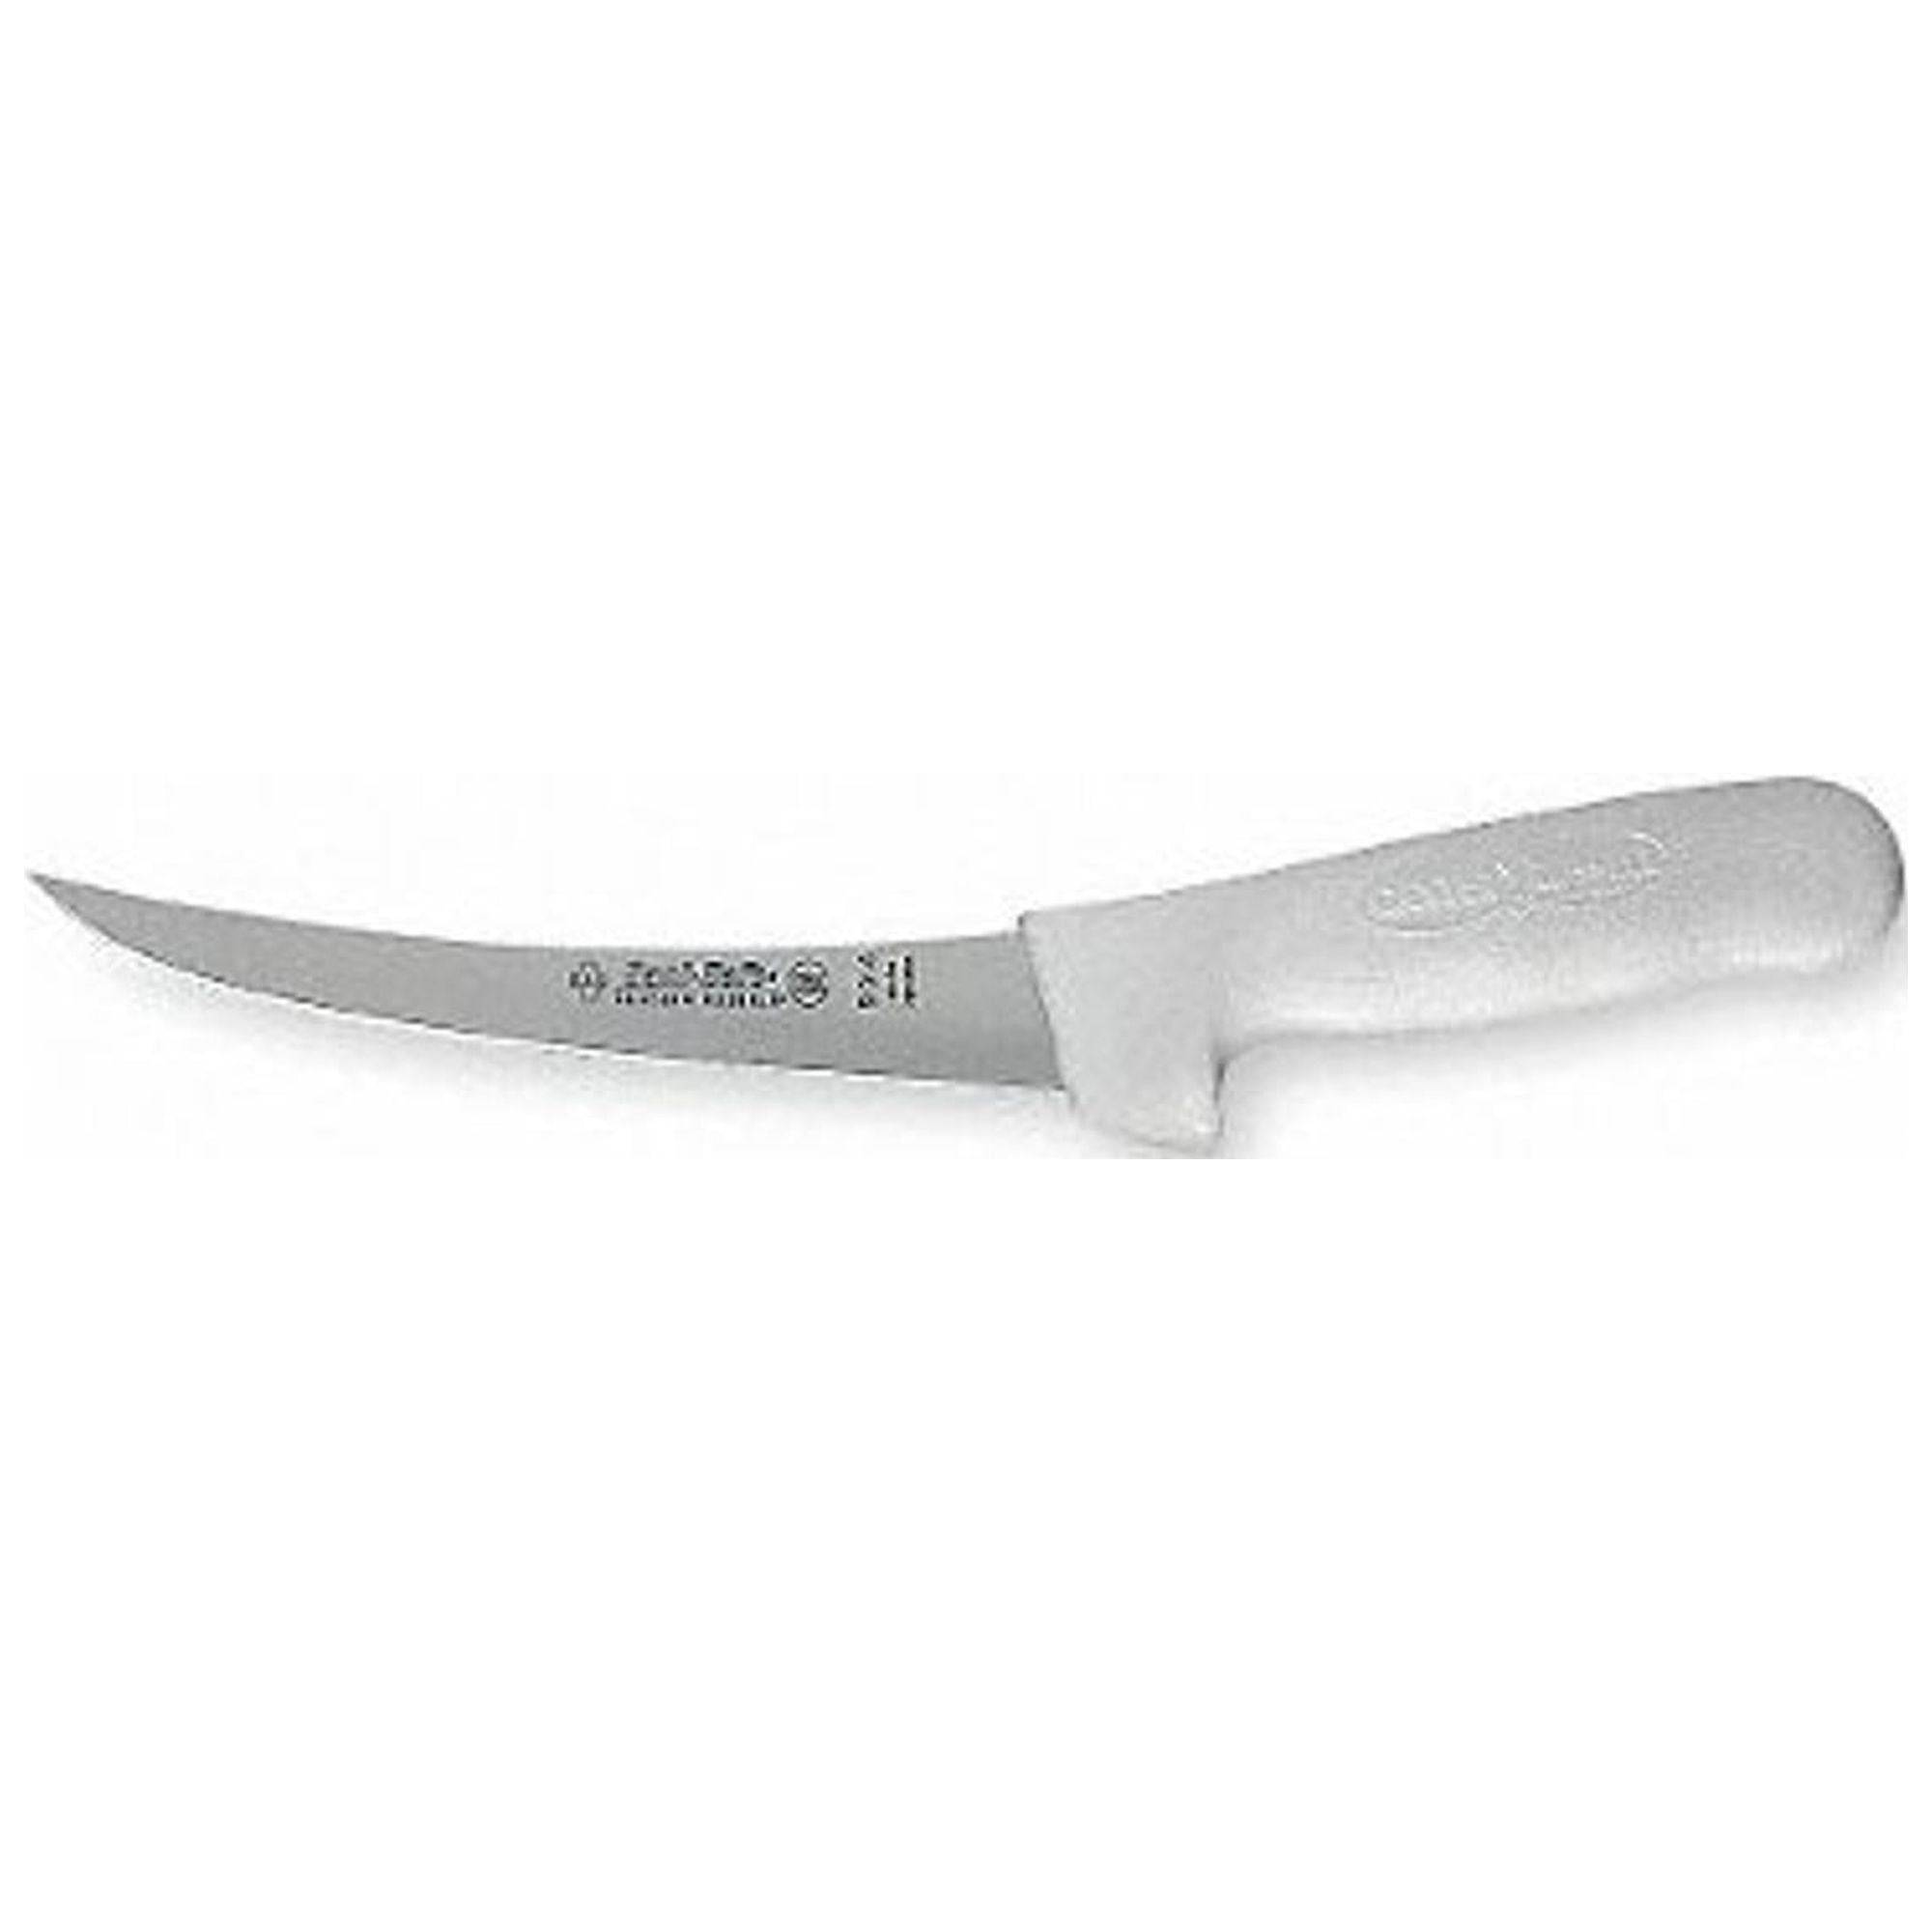 Dexter Russell Industrial 1 1/8 Bent Putty Knife 50391 3BE-1 1/8